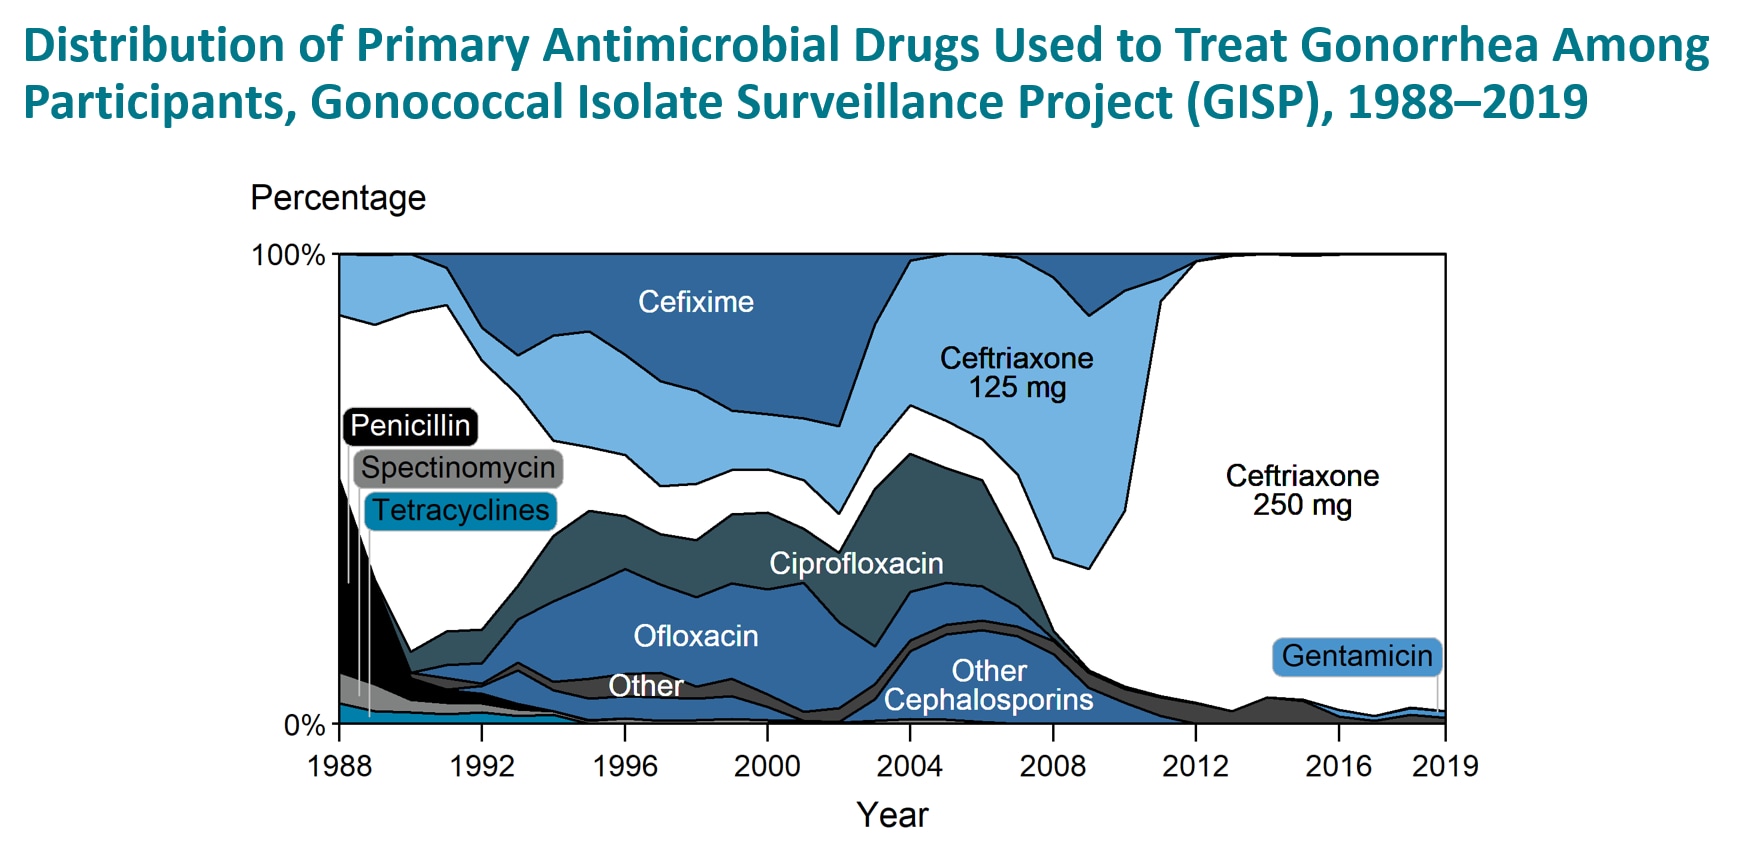 Distribution of Primary Antimicrobial Drugs Used to Treat Gonorrhea Among Participants, Gonococcal Isolate Surveillance Project (GISP), 1988–2019